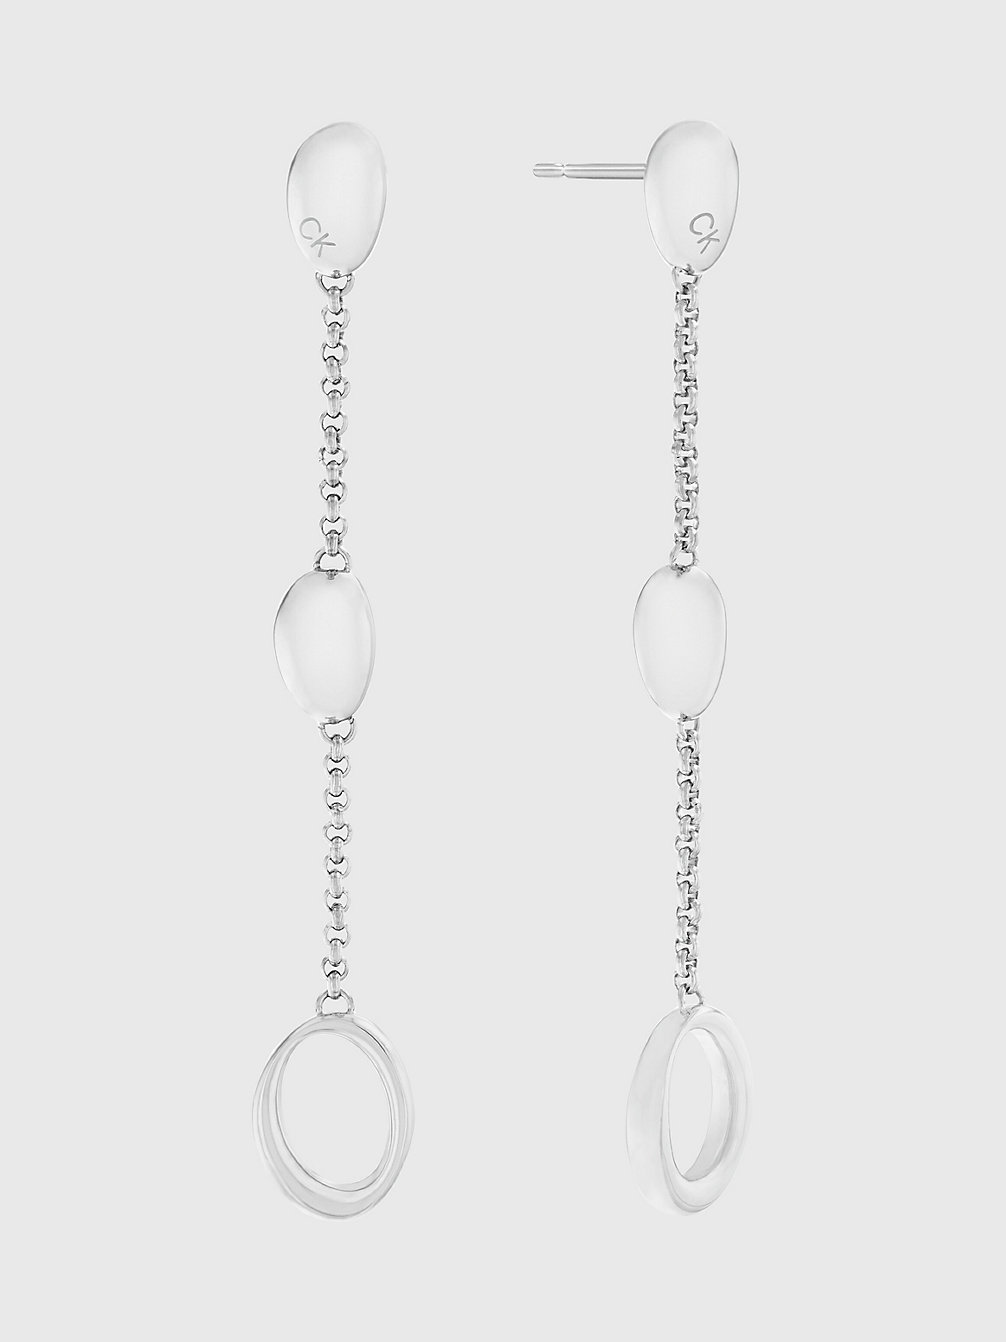 Orecchini - Playful Organic Shapes > SILVER > undefined donna > Calvin Klein